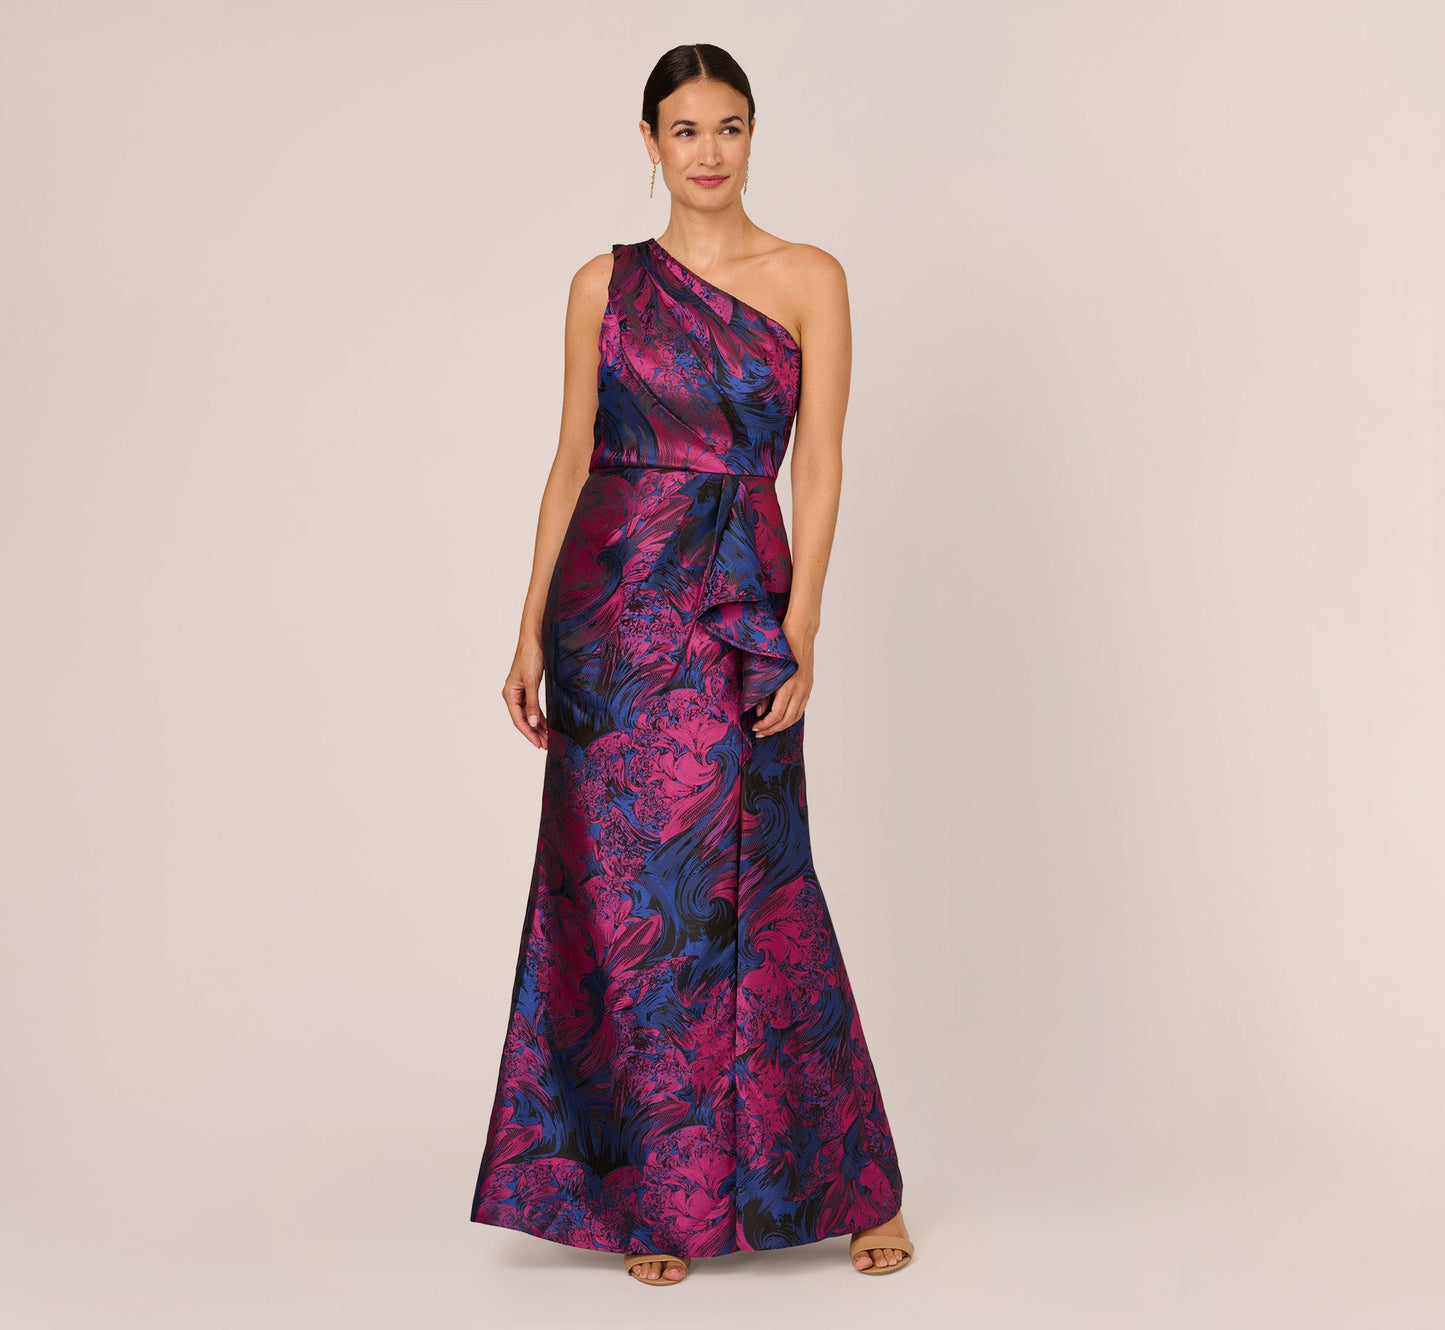 Adrianna Papell Jacquard Mermaid Gown